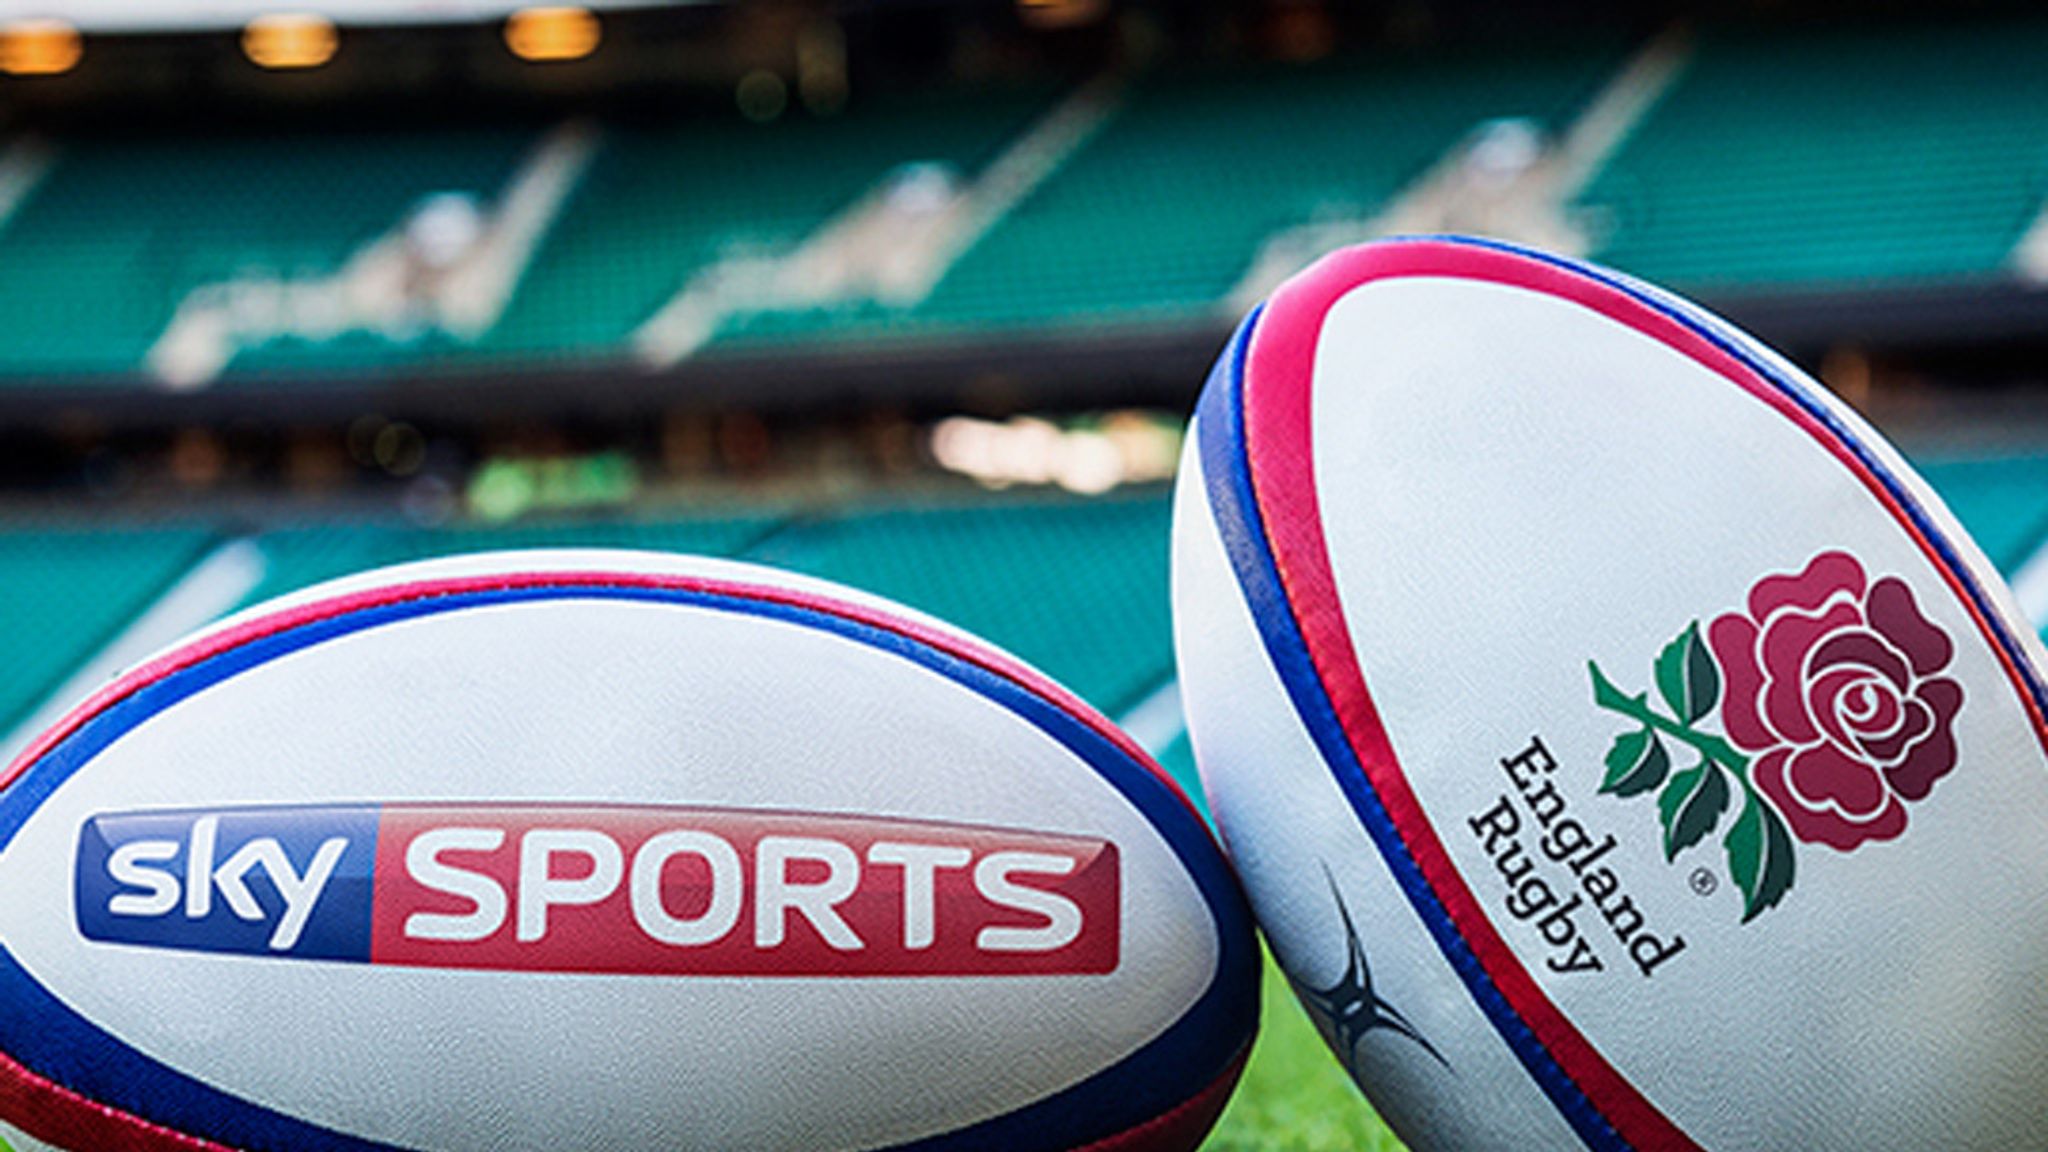 Sky Sports and the RFU are to continue their long-lasting partnership Rugby Union News Sky Sports